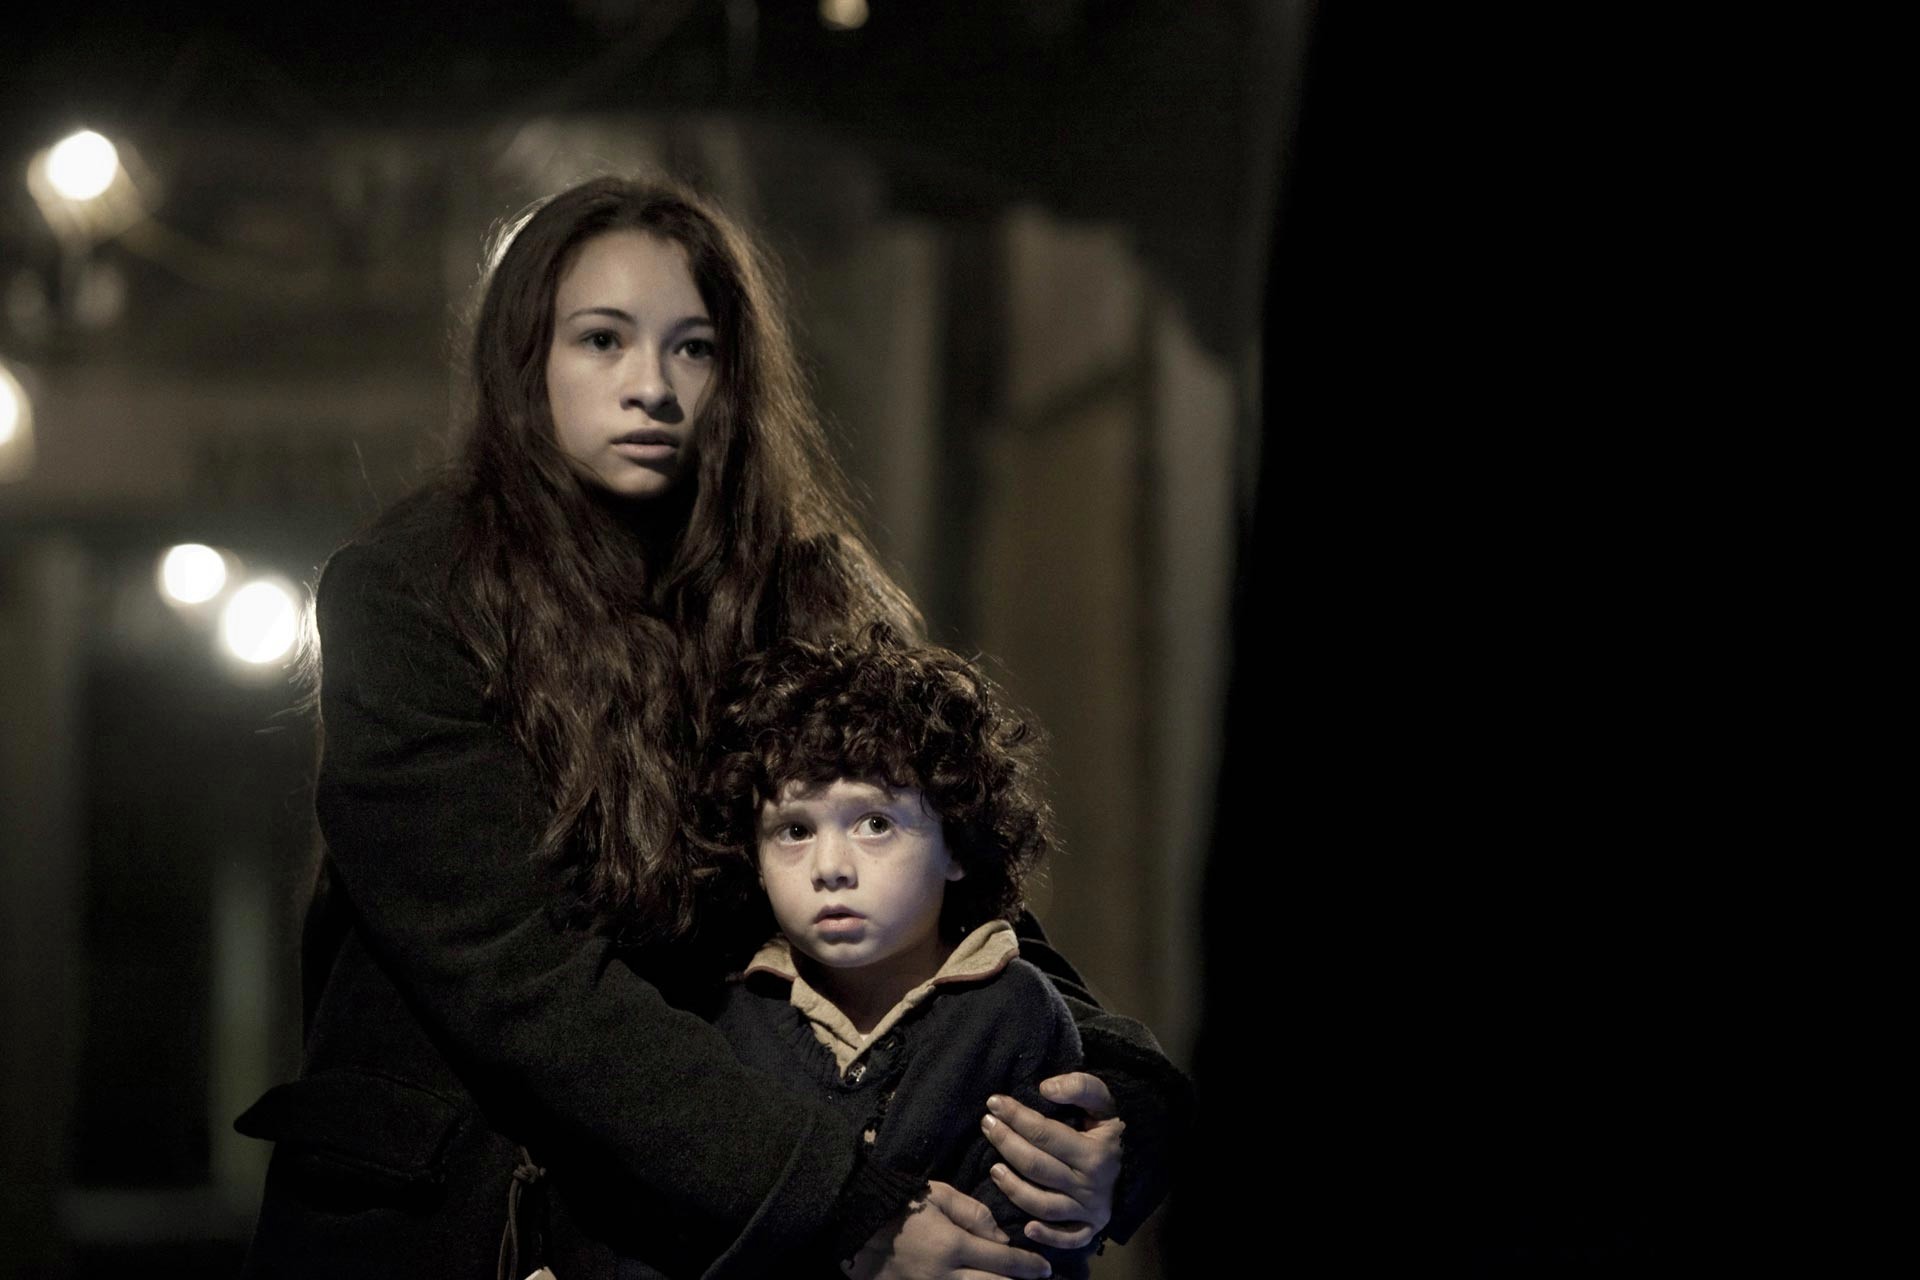 Jodelle Ferland stars as Jenny and Kyle Harrison Breitkopf stars as David in Image Entertainment's The Tall Man (2012)